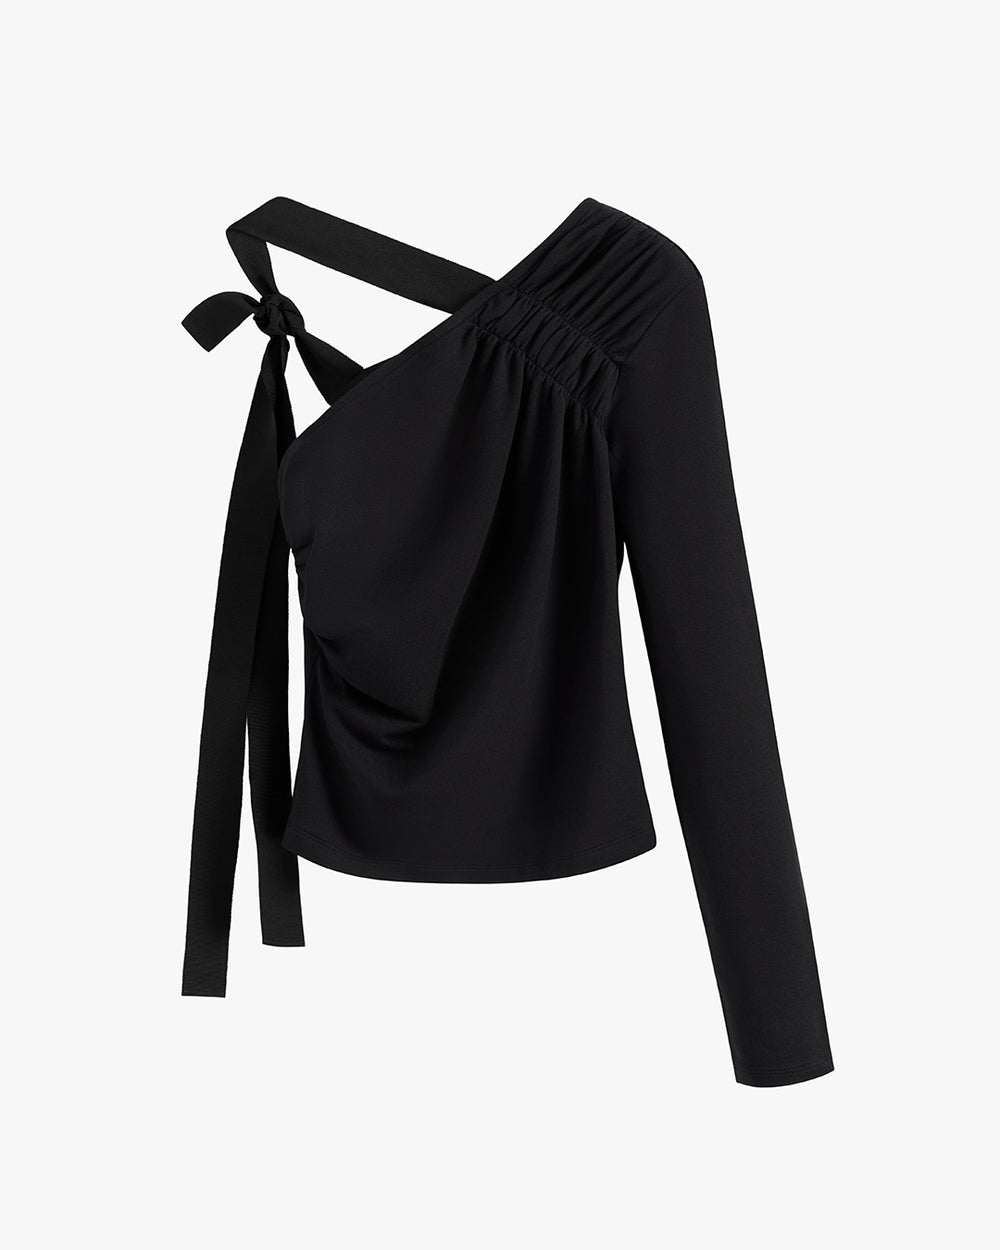 One-shoulder blouse with a tied bow and long sleeve.